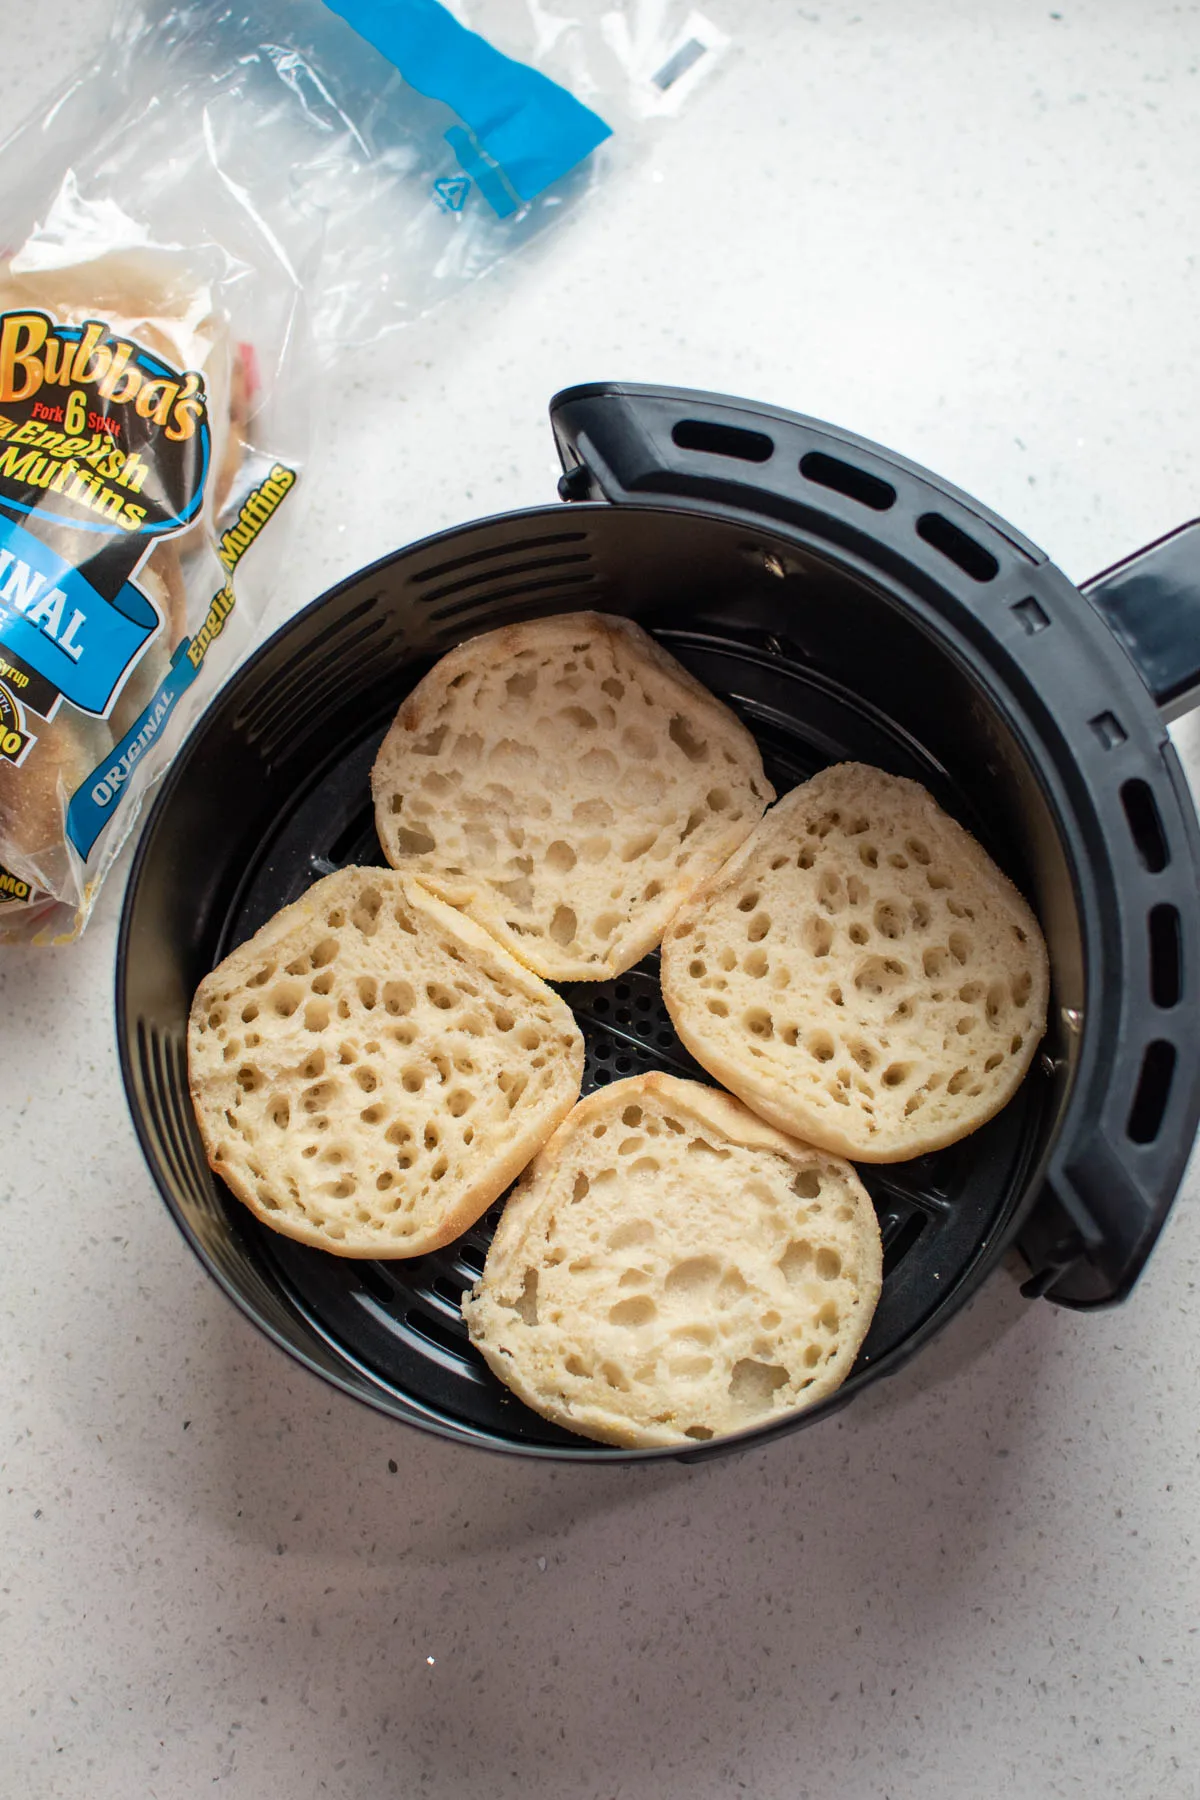 Four English muffin halves in air fryer on counter.